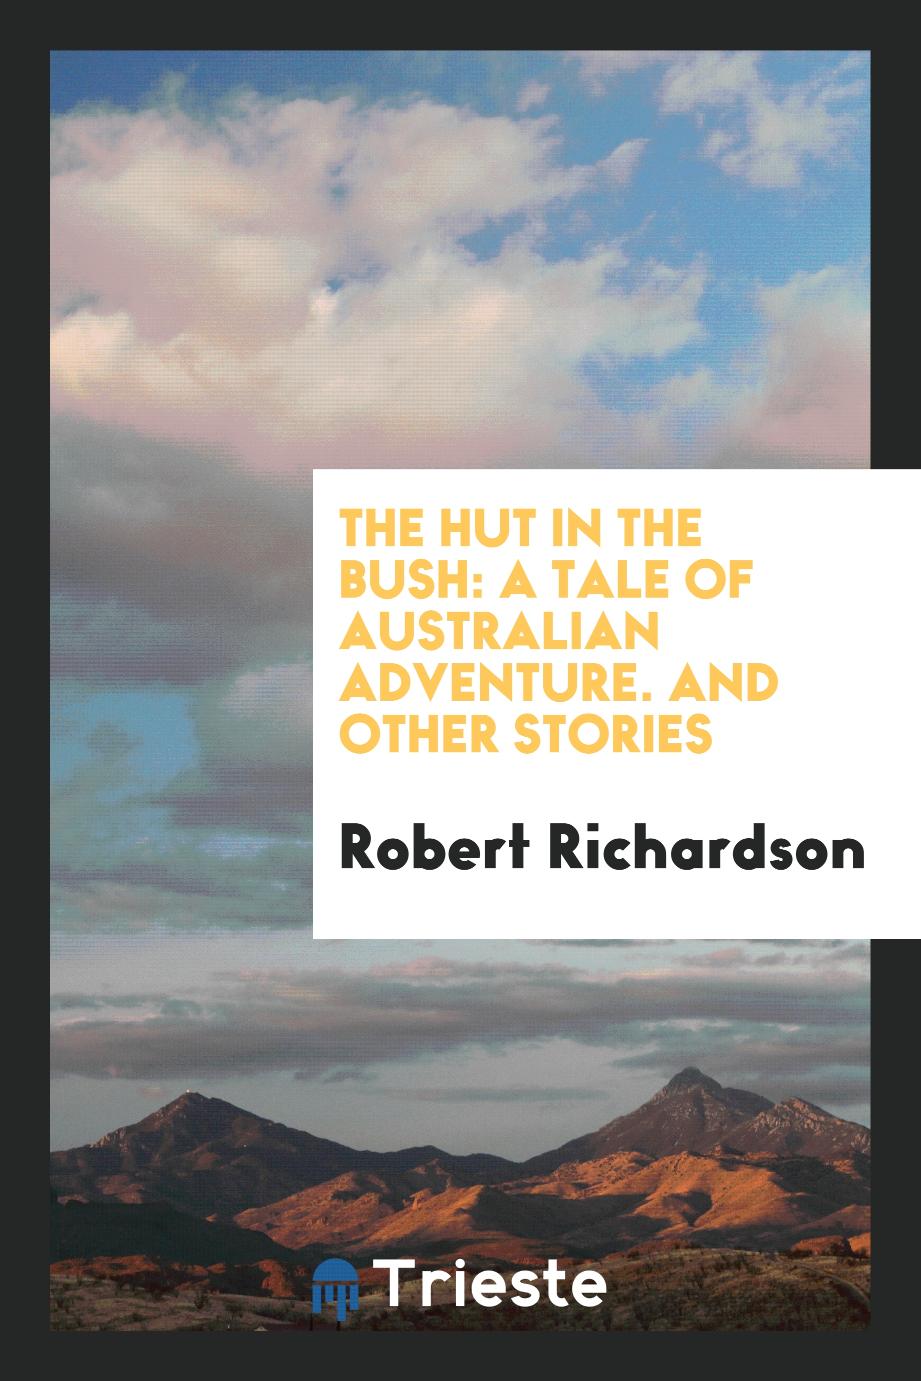 The Hut in the Bush: A Tale of Australian Adventure. And Other Stories